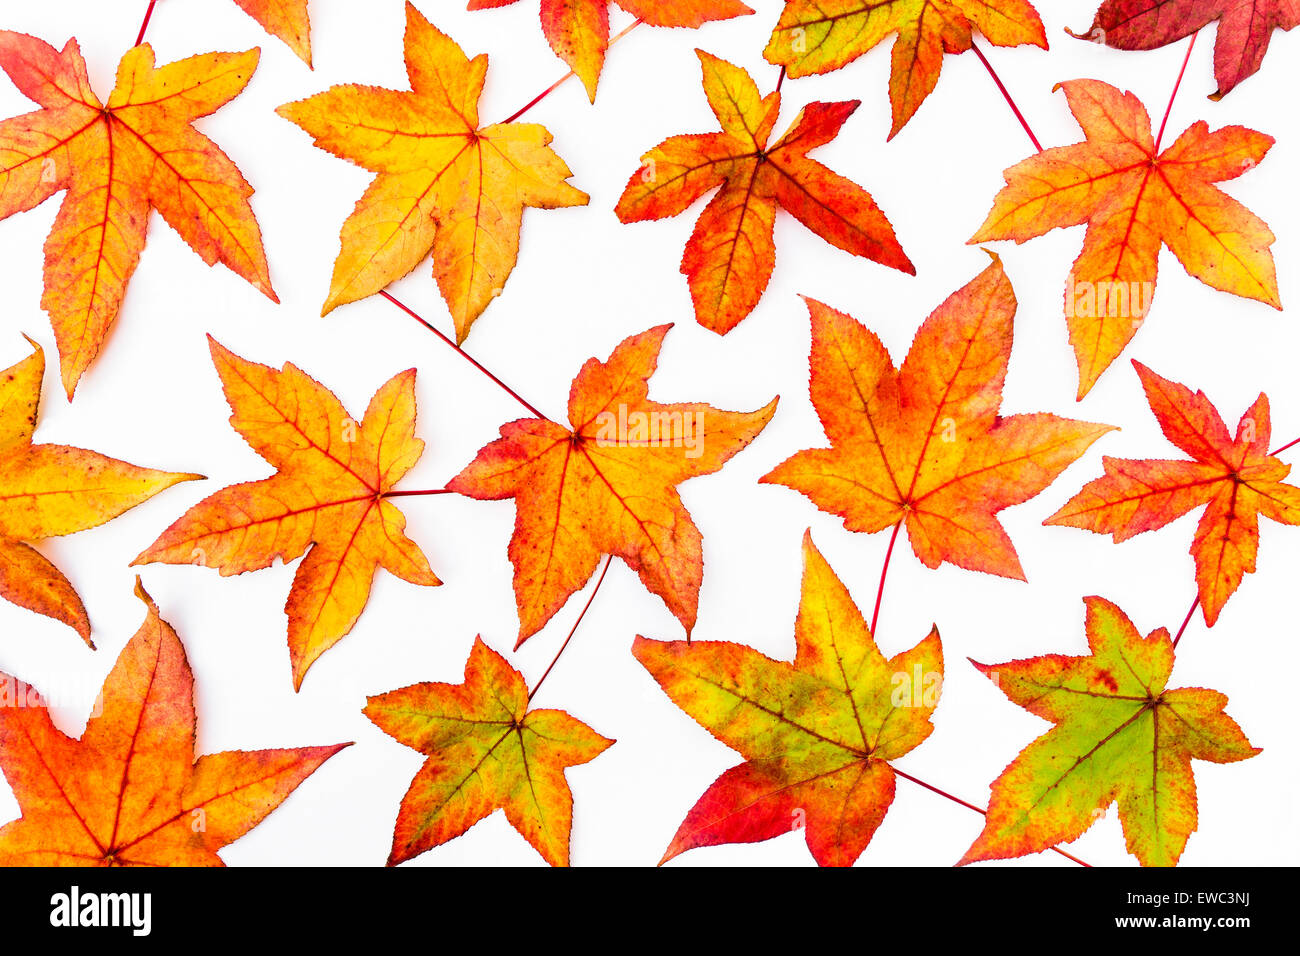 Fall maple leaves in various autumn colors isolated on white background Stock Photo